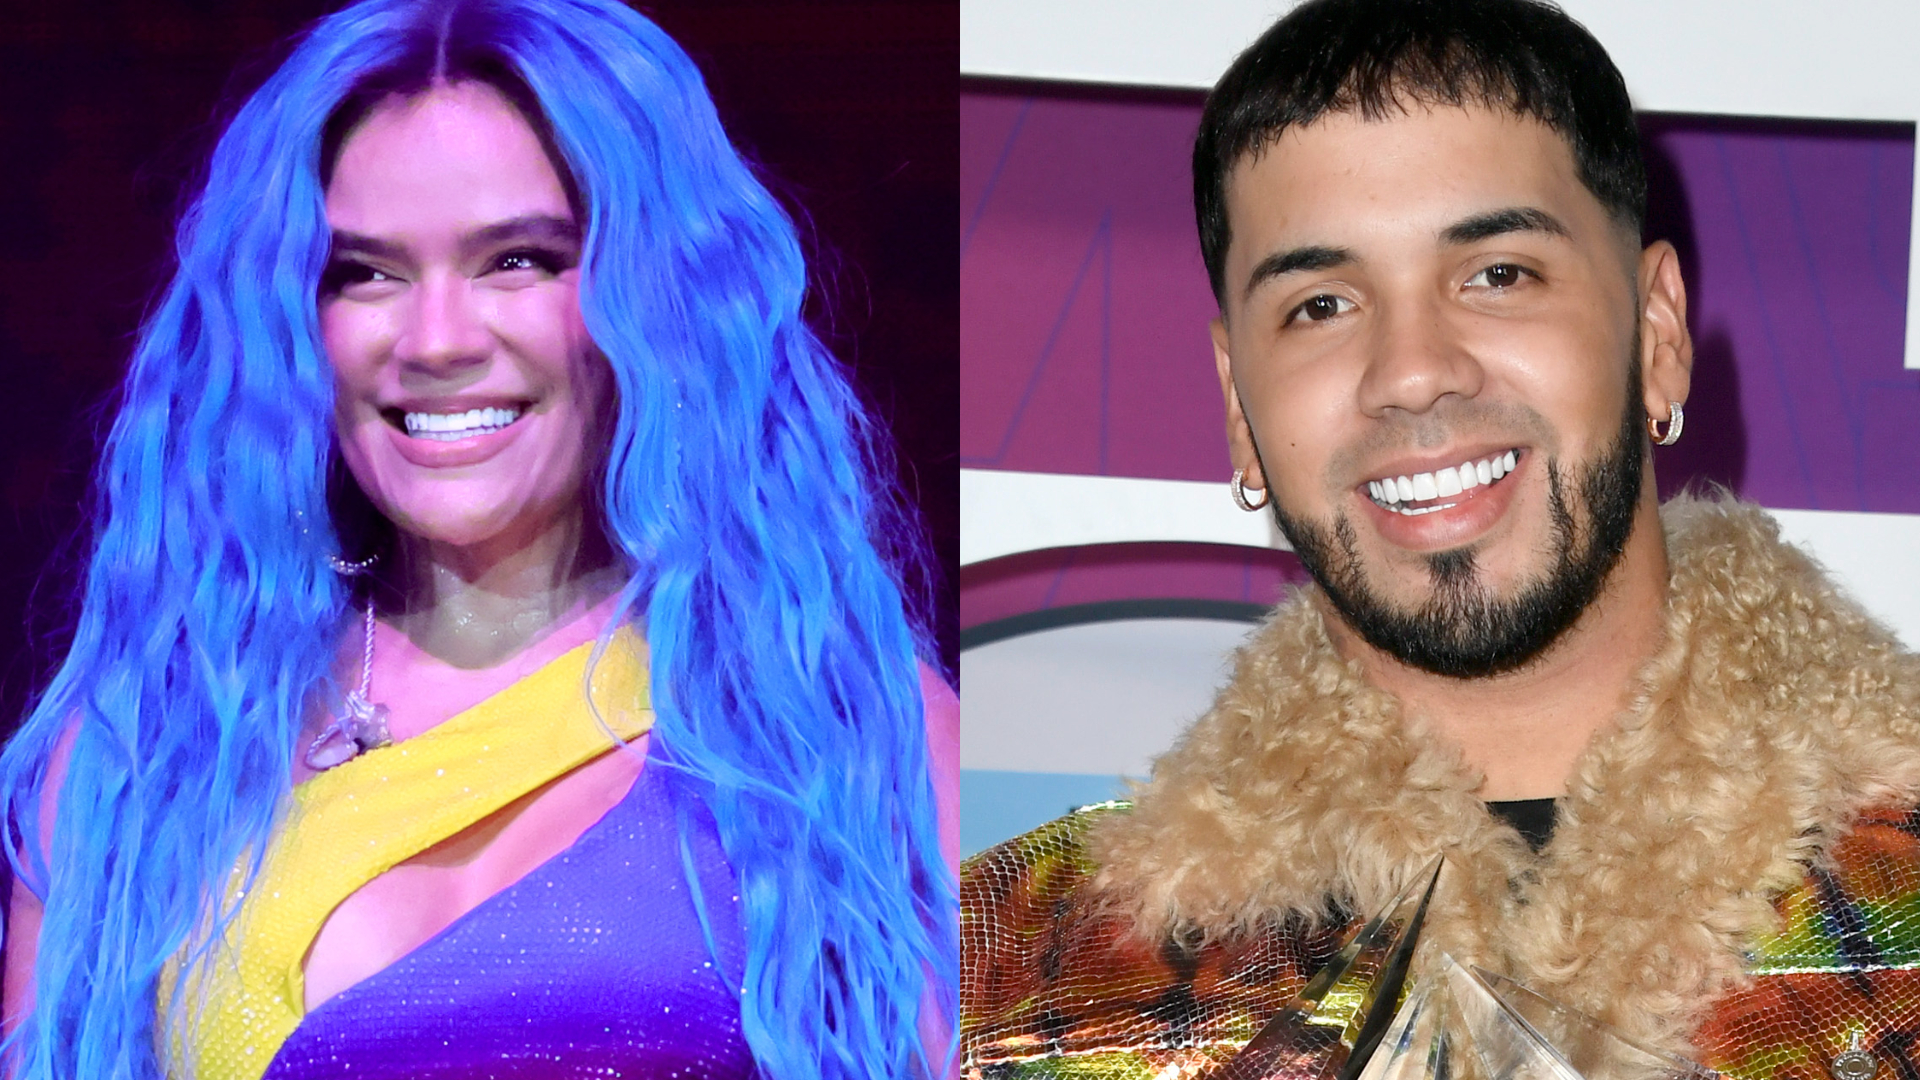 Coachella’s Karol G: Ends With A “Wrinkled Heart” And Ex Anuel AA Reacts To It |  Famous